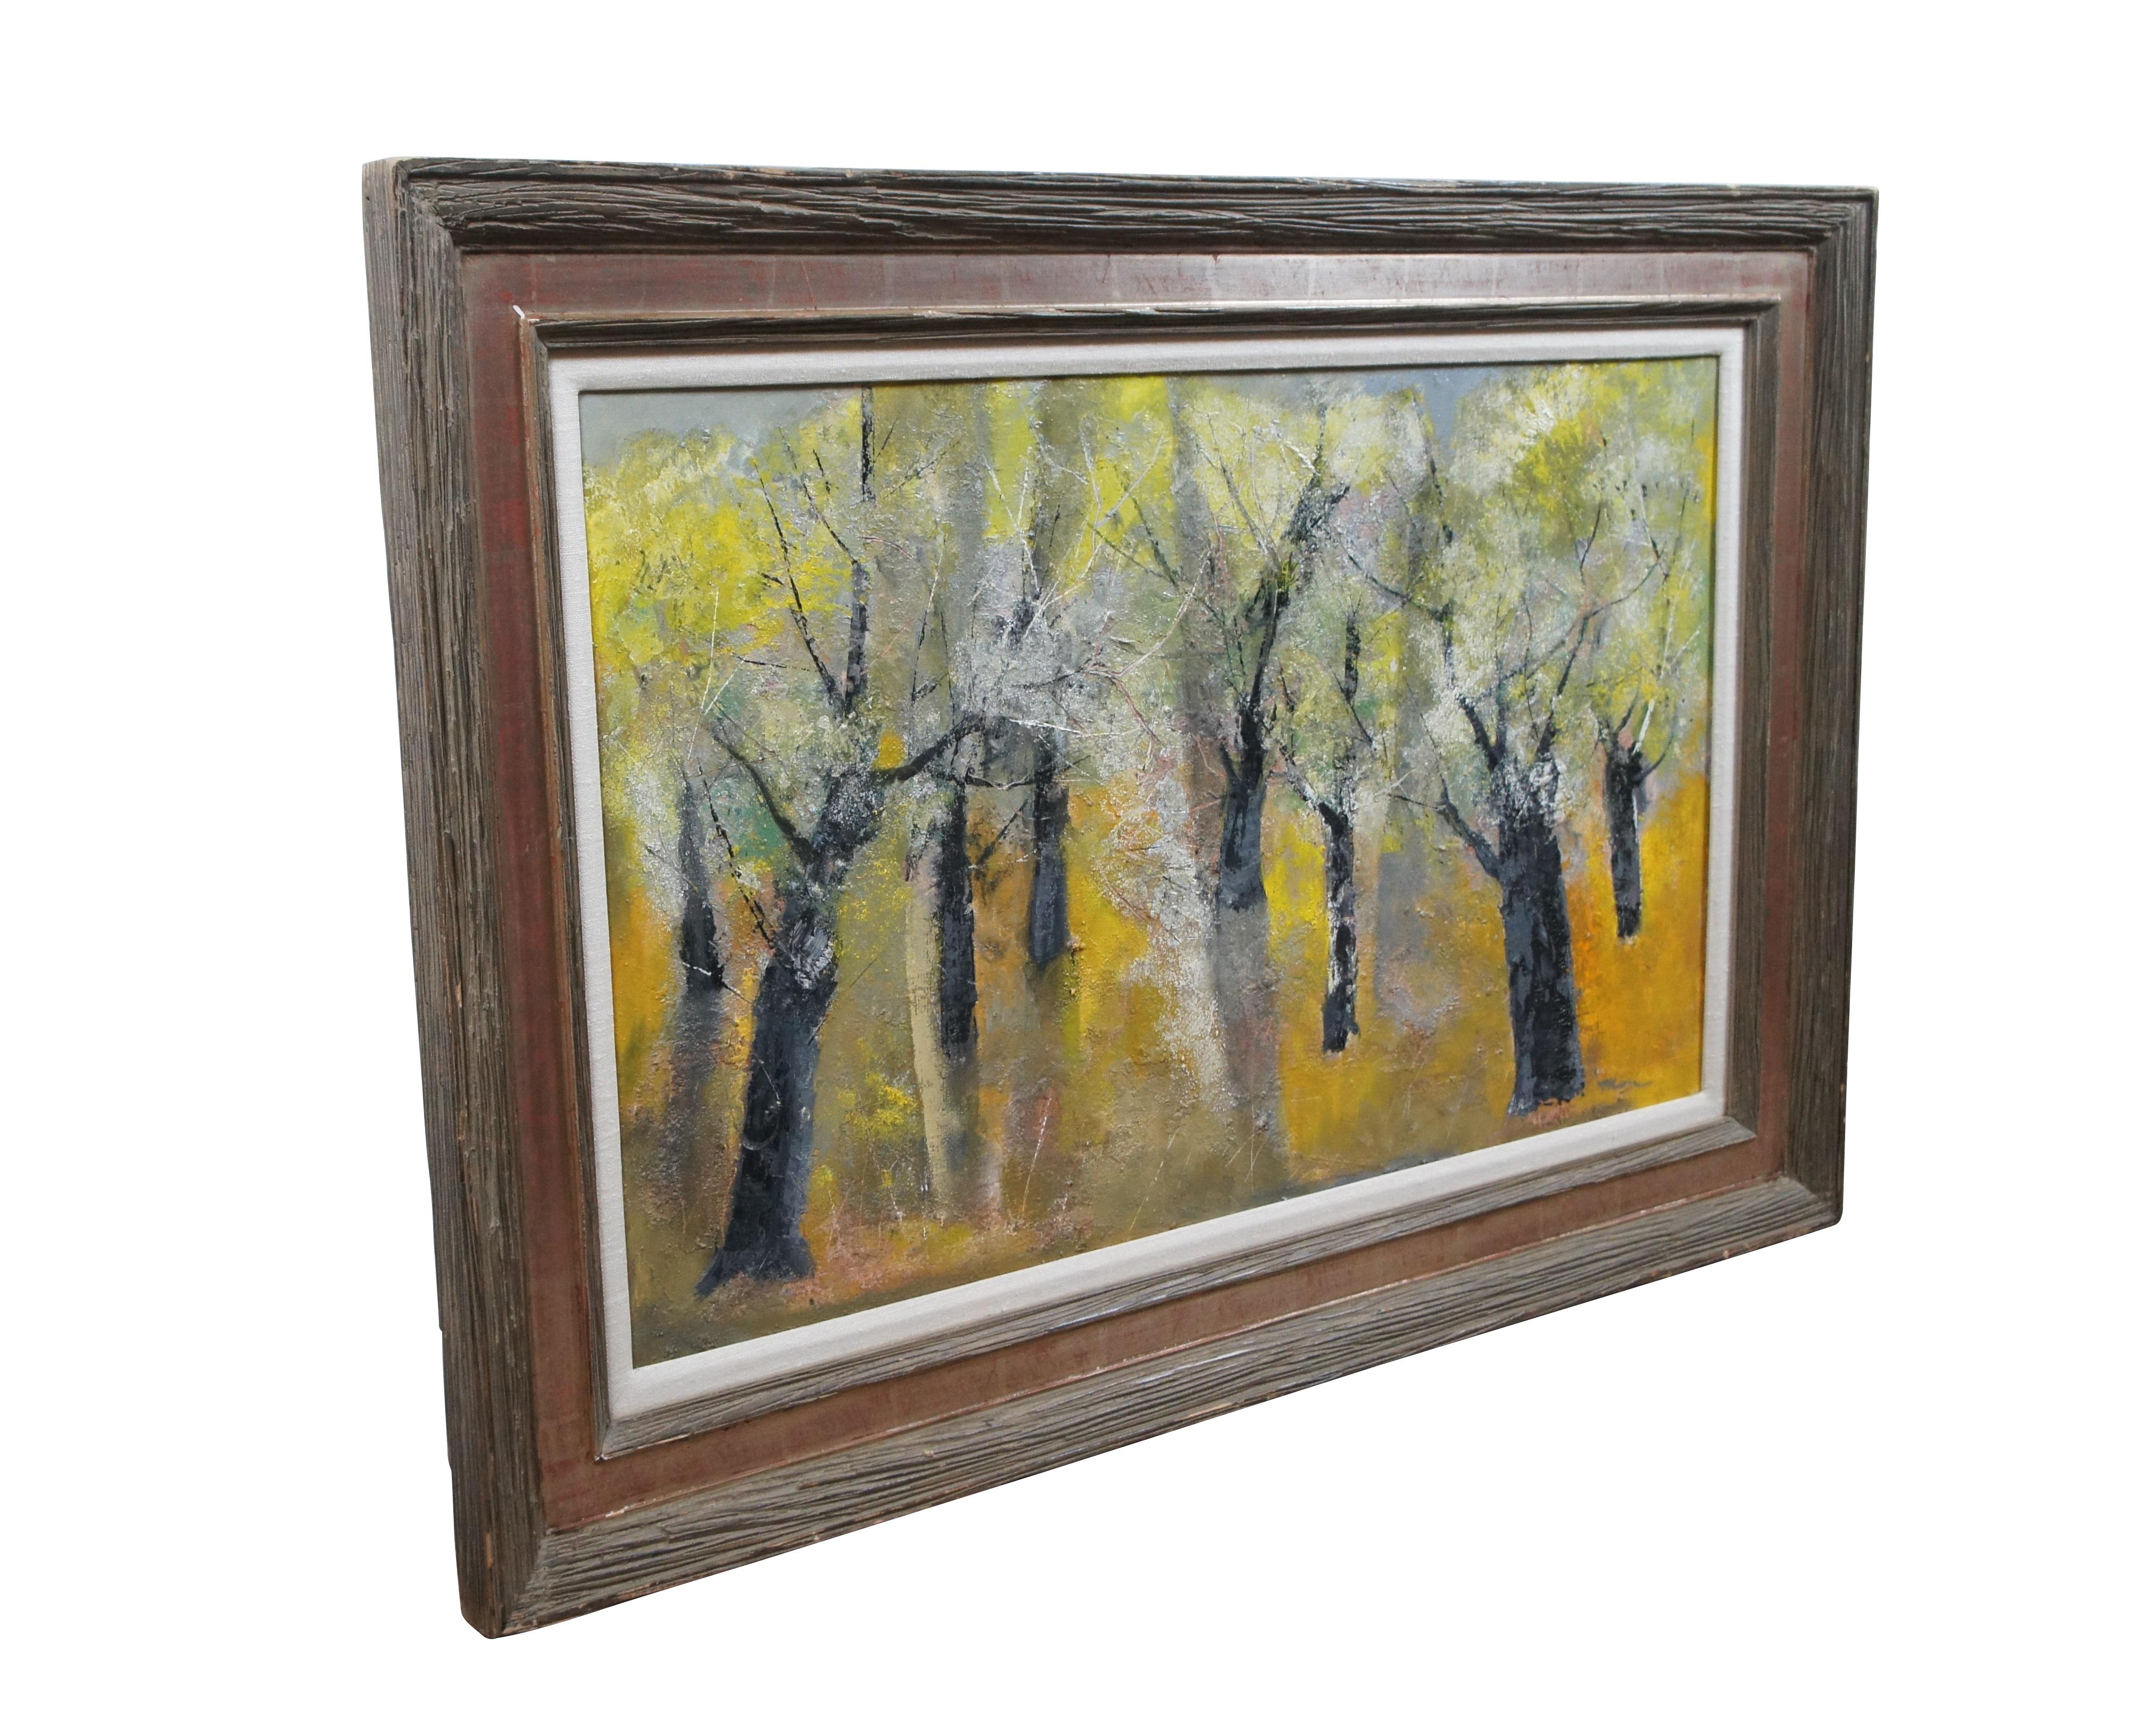 Mid 20th century oil on board landscape painting by William Thon, titled 